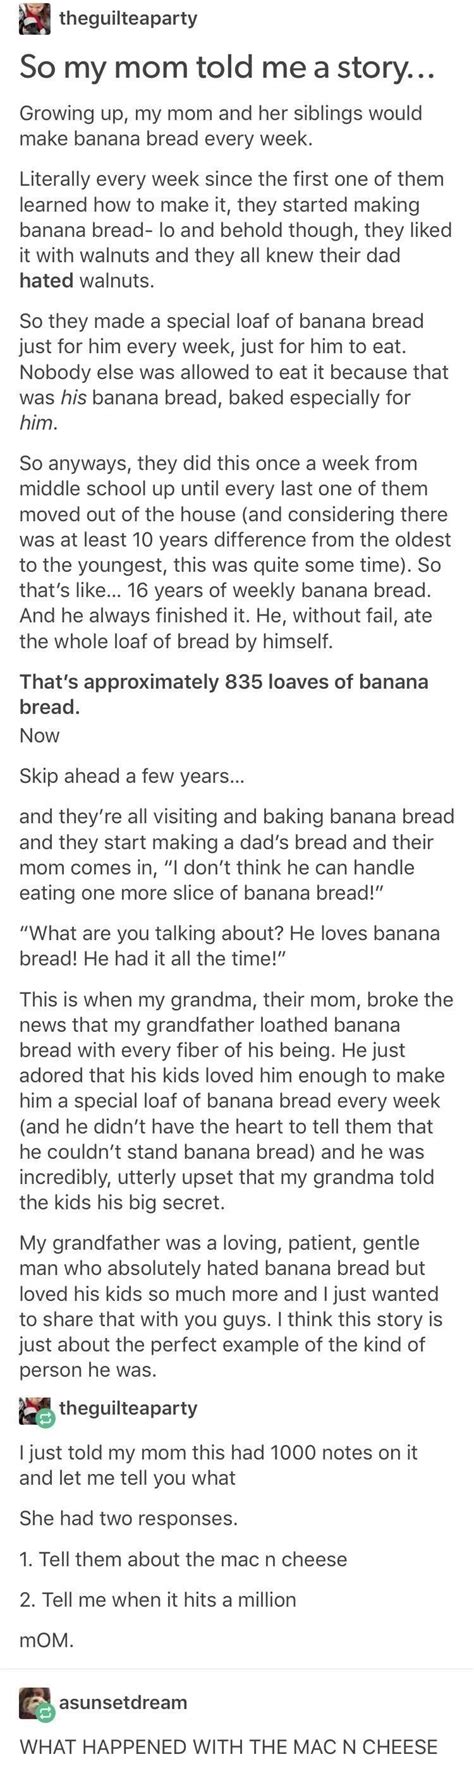 14 entertaining stories from tumblr that are fun to read tumblr stories funny stories funny